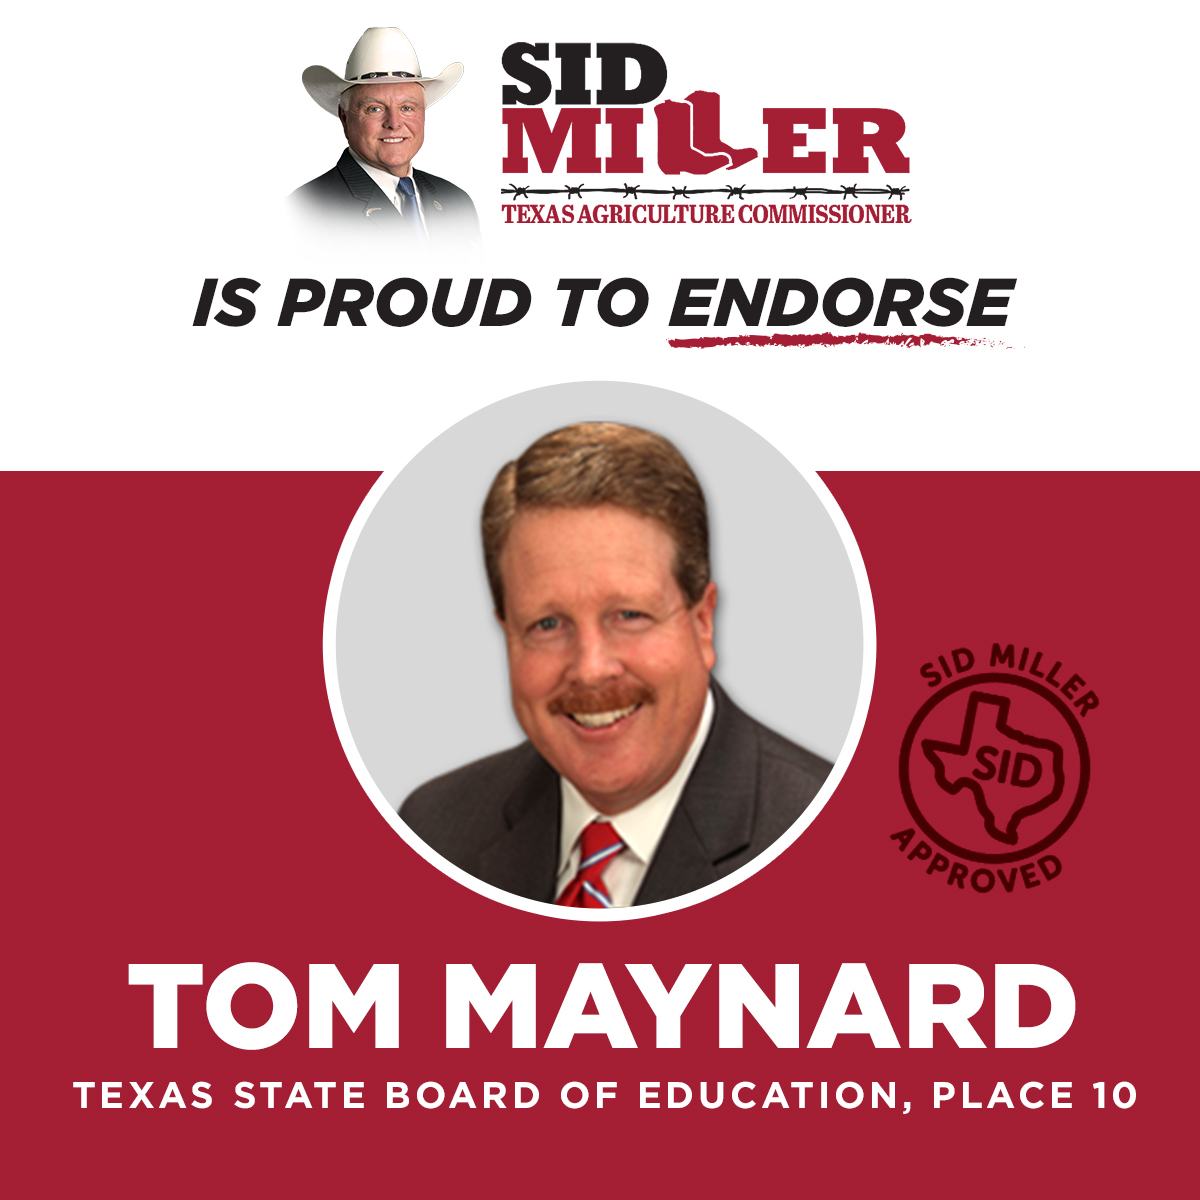 The TSBE is one of the most important in the country. Tom Maynard has been a highly capable, principled, conservative leader on the board. He brings managerial competence and subject matter expertise essential to the responsibilities of the position.